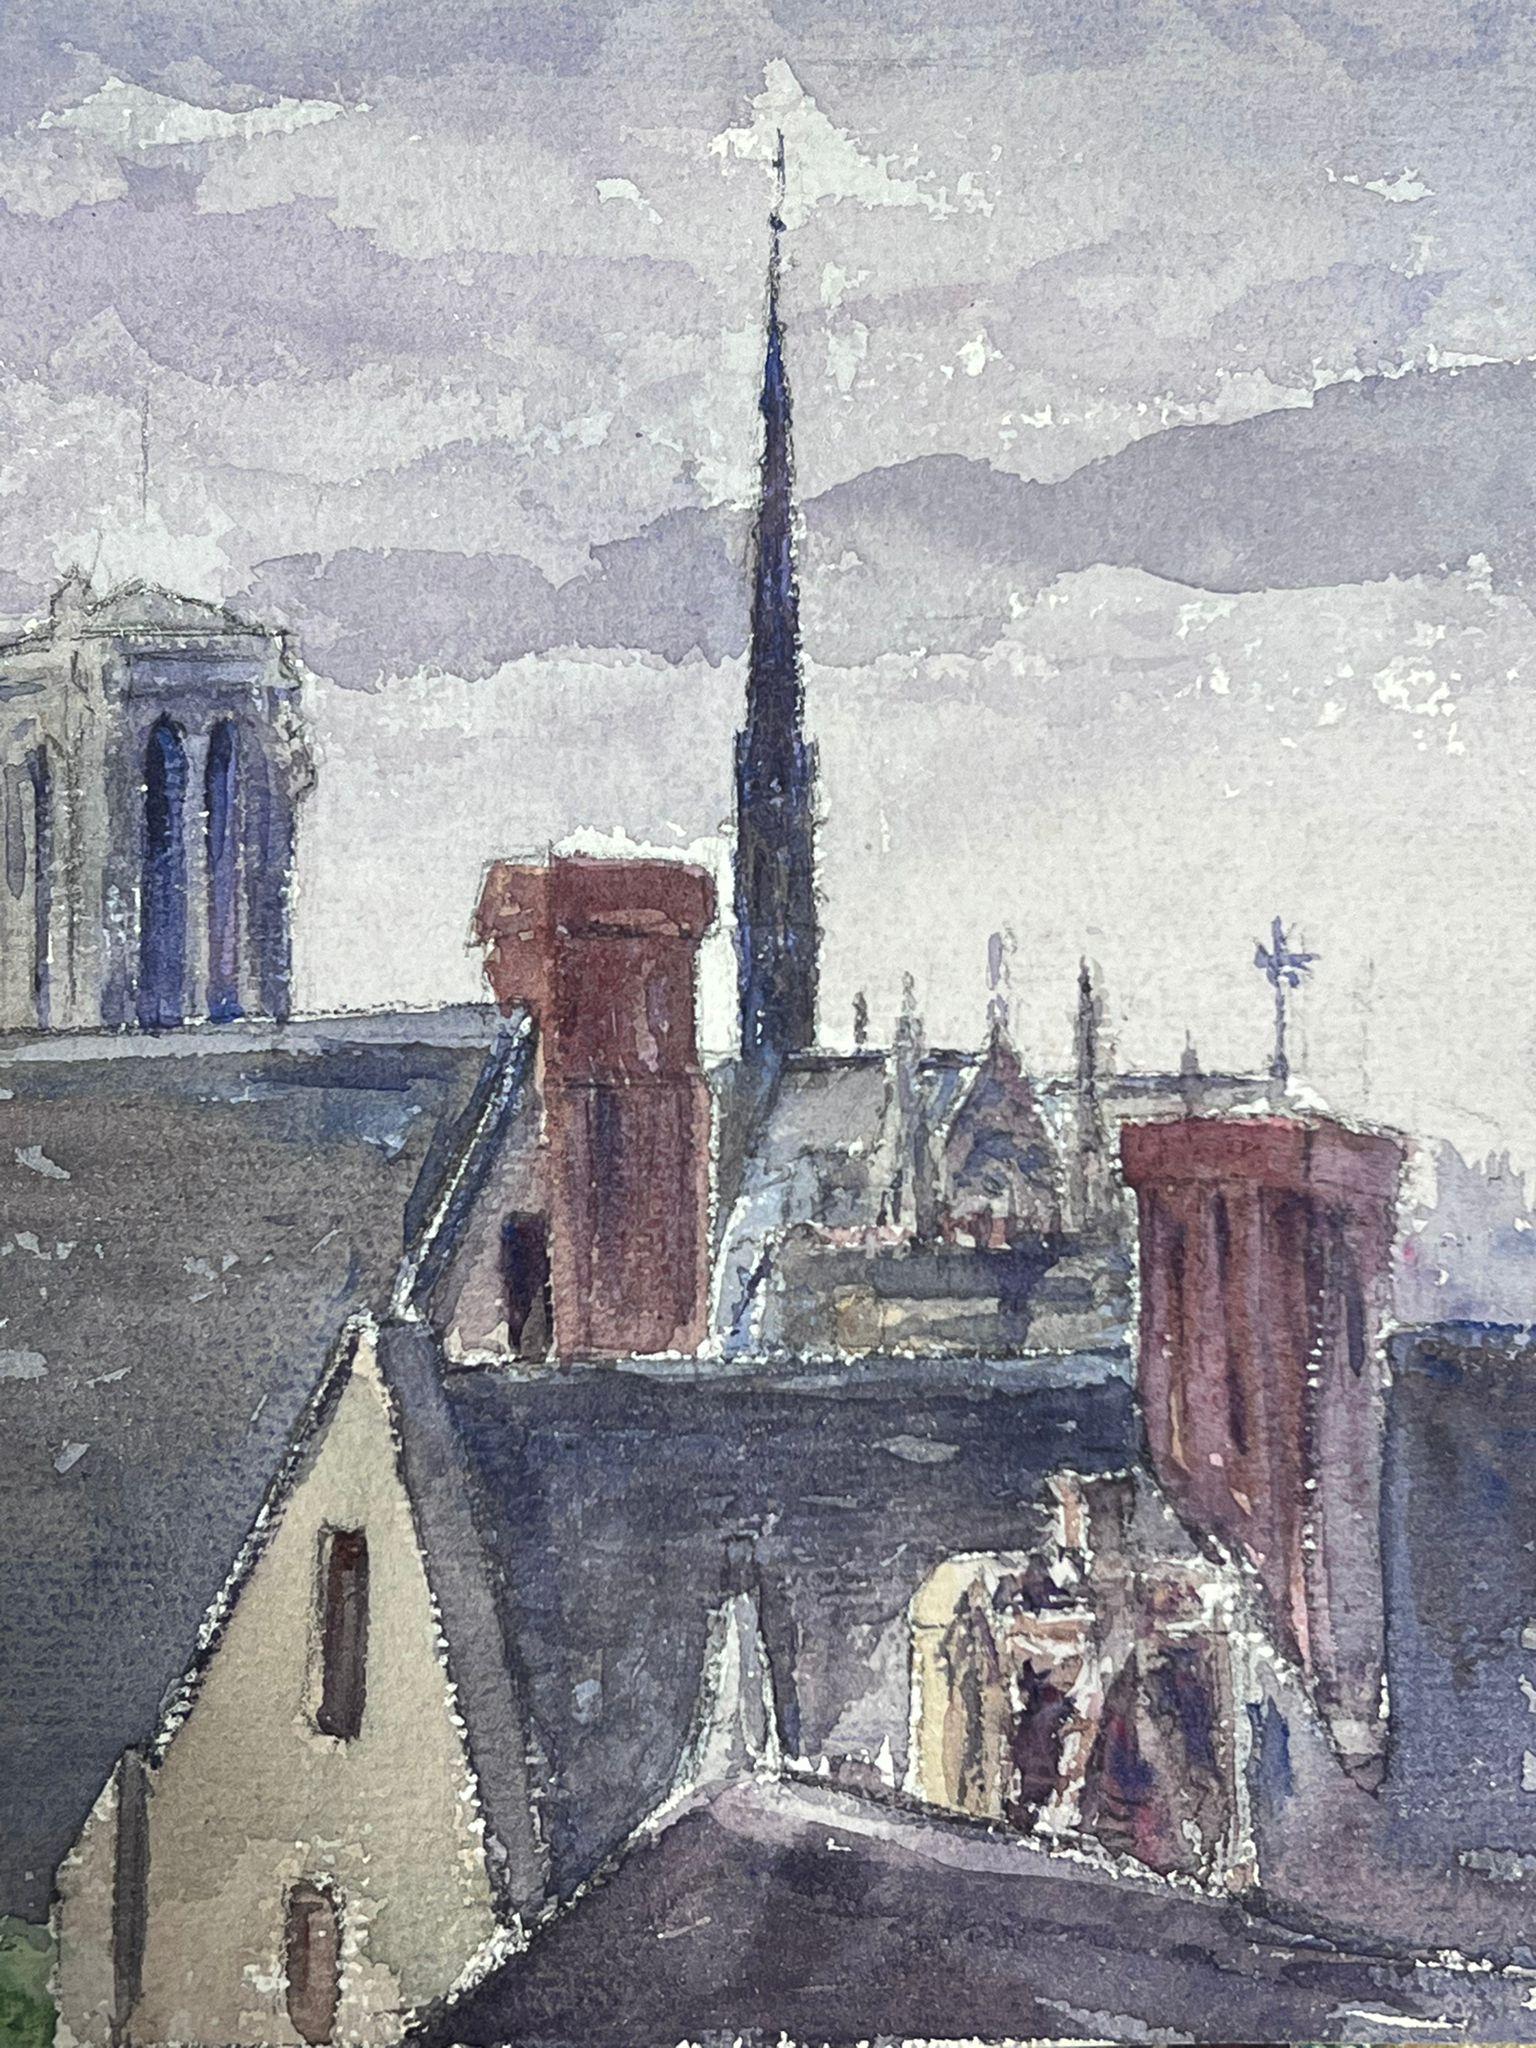 Paris Roof Tops
by Louise Alix, French 1950's Impressionist 
watercolour on artist paper, unframed
painting: 8 x 11 inches
provenance: from a large private collection of this artists work in Northern France
condition: original, good and sound